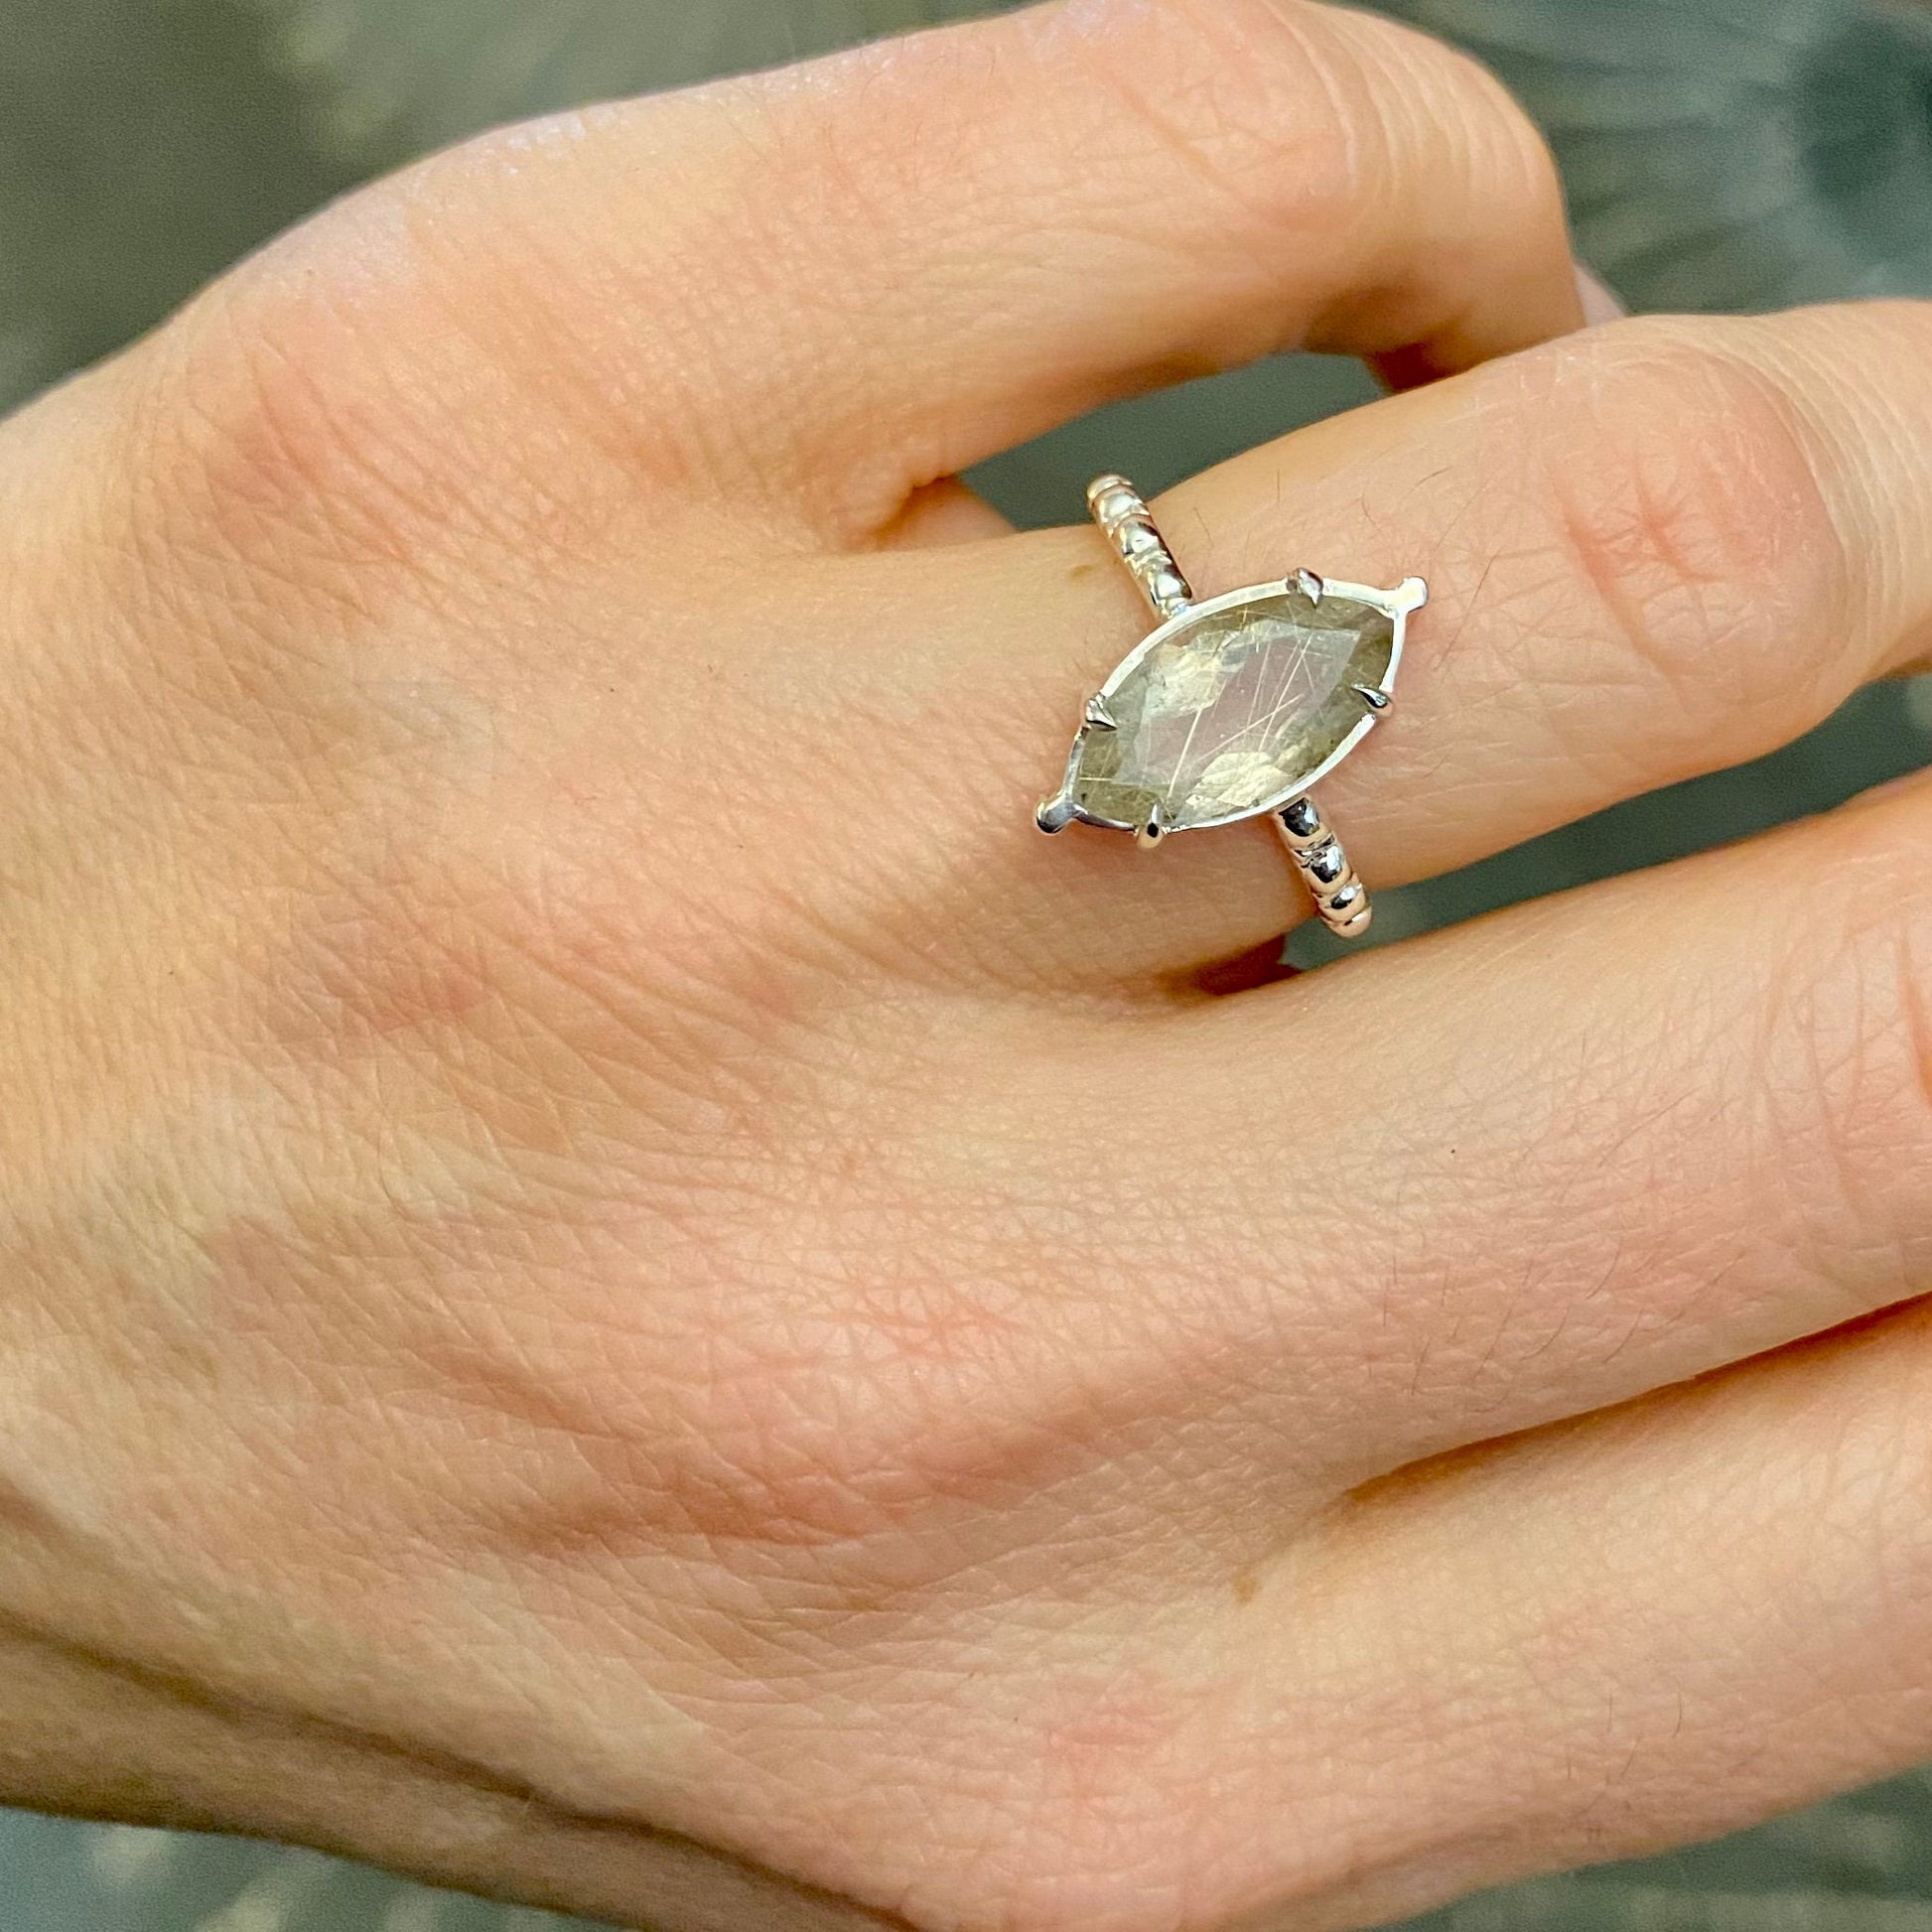 A woman's hand holding a Rutile Quartz and Vintage Sterling Silver Milgrain Band Ring, Diamond Shape Stone Ring, Handmade Marquise Gemstone Prong Setting by Cassin Jewelry